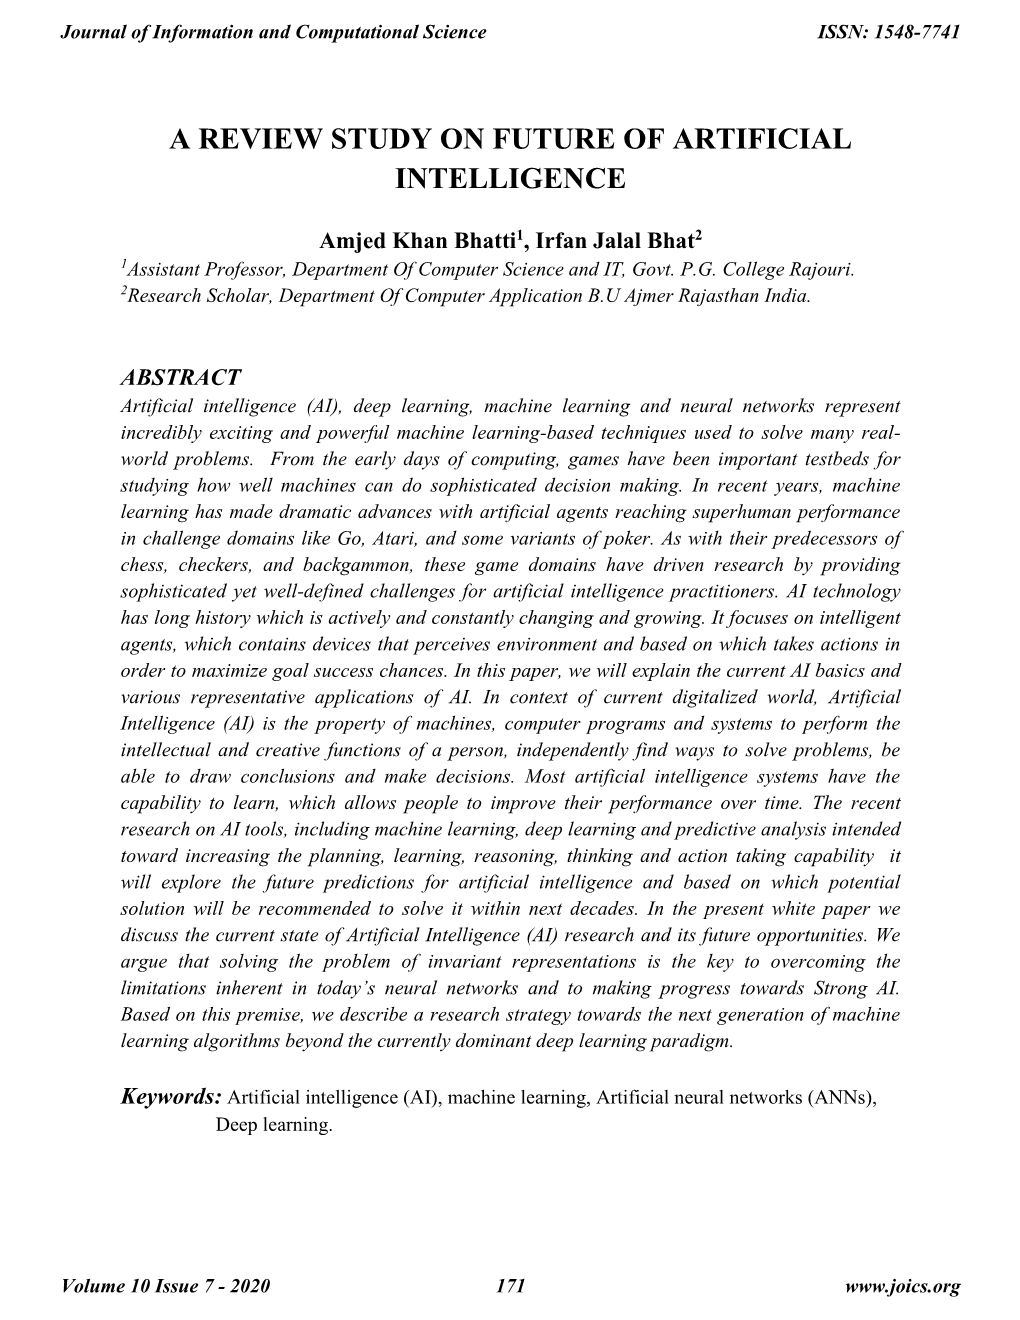 A Review Study on Future of Artificial Intelligence